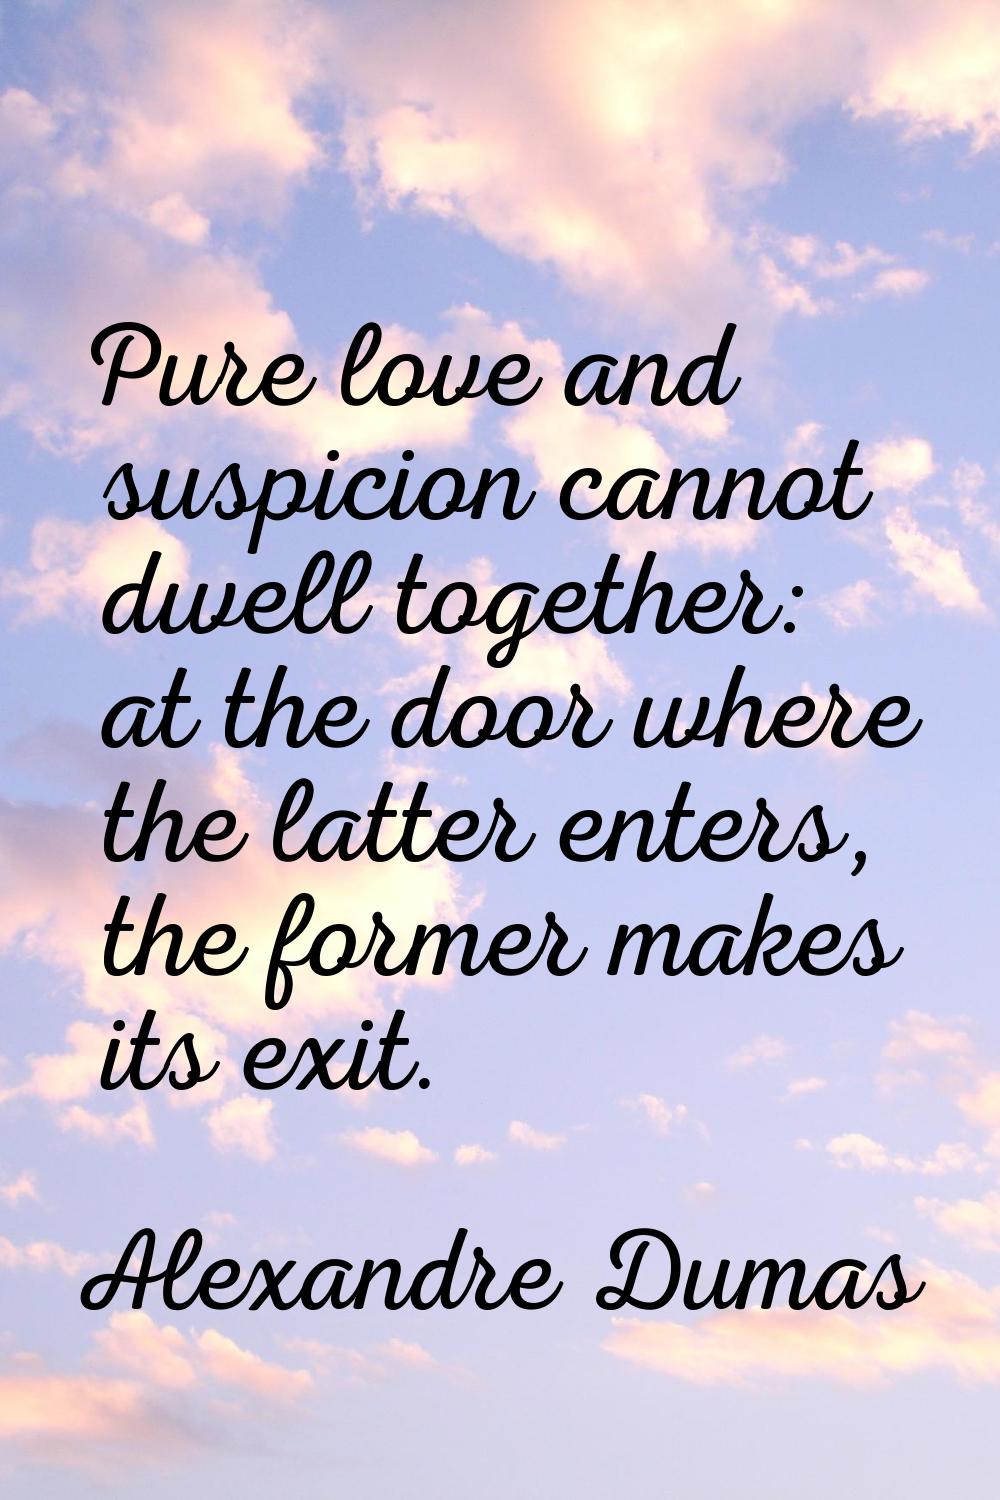 Pure love and suspicion cannot dwell together: at the door where the latter enters, the former make